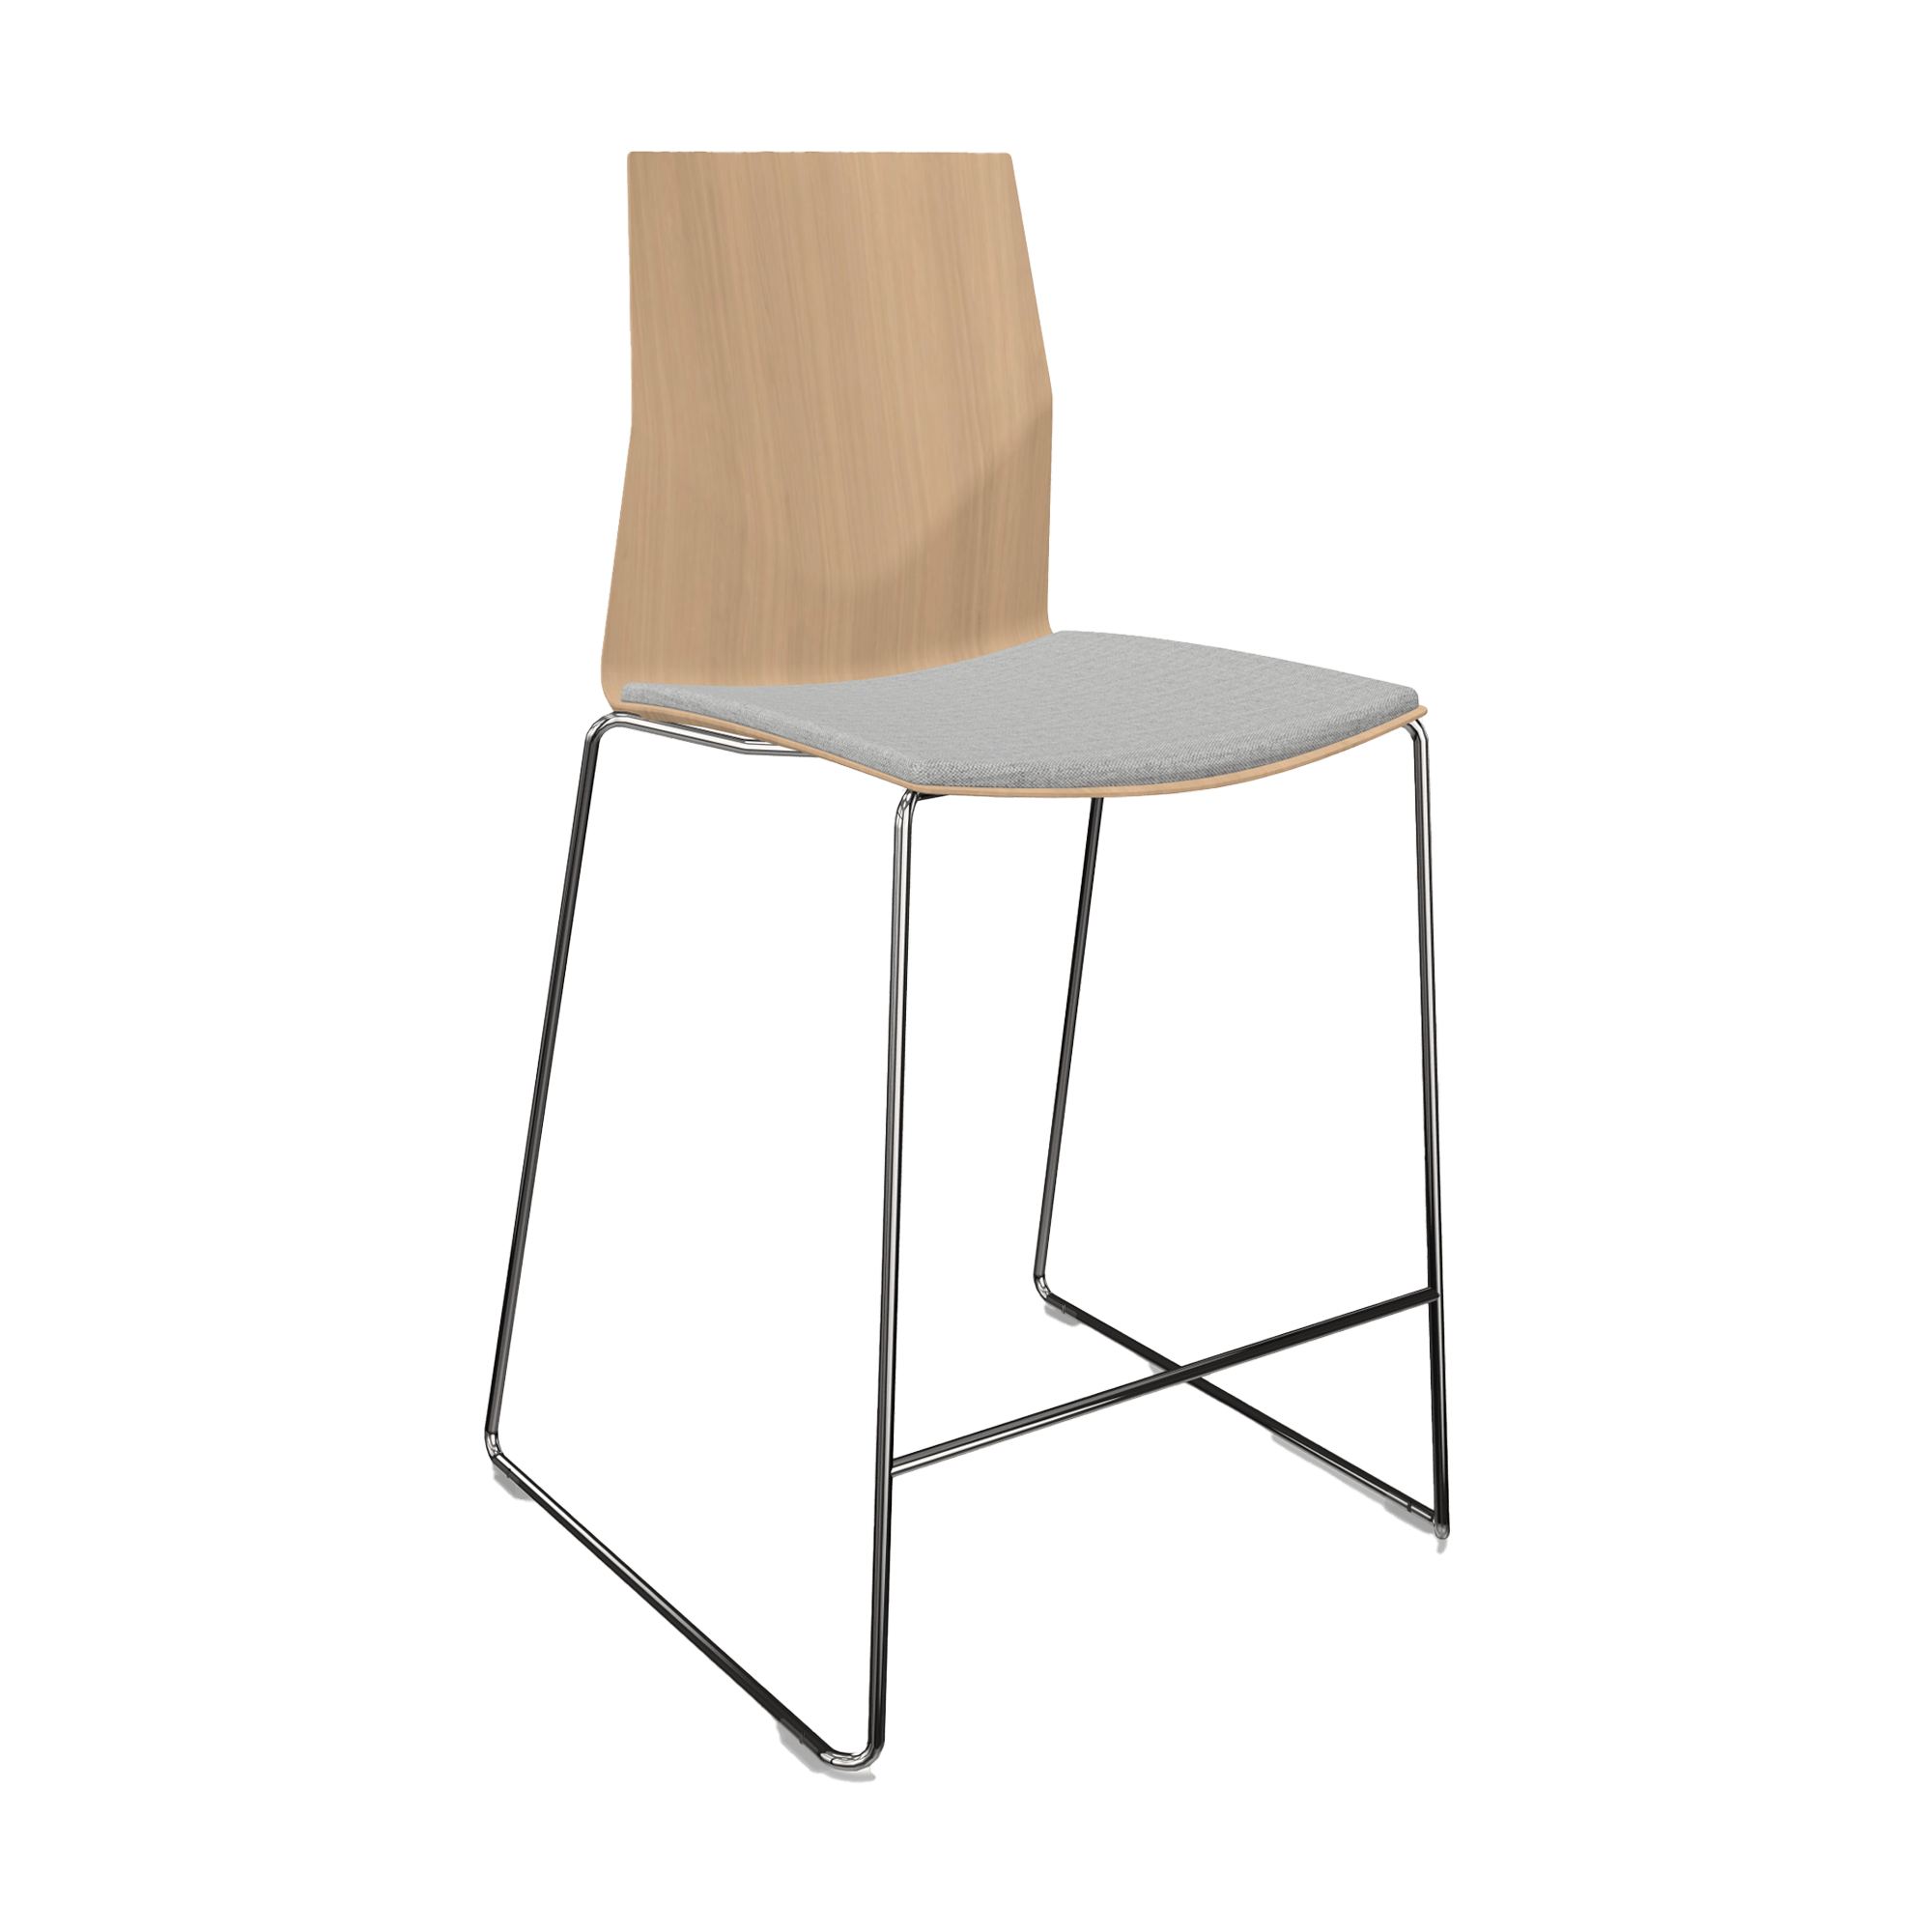 A counter height chair with a wooden frame and a grey seat.